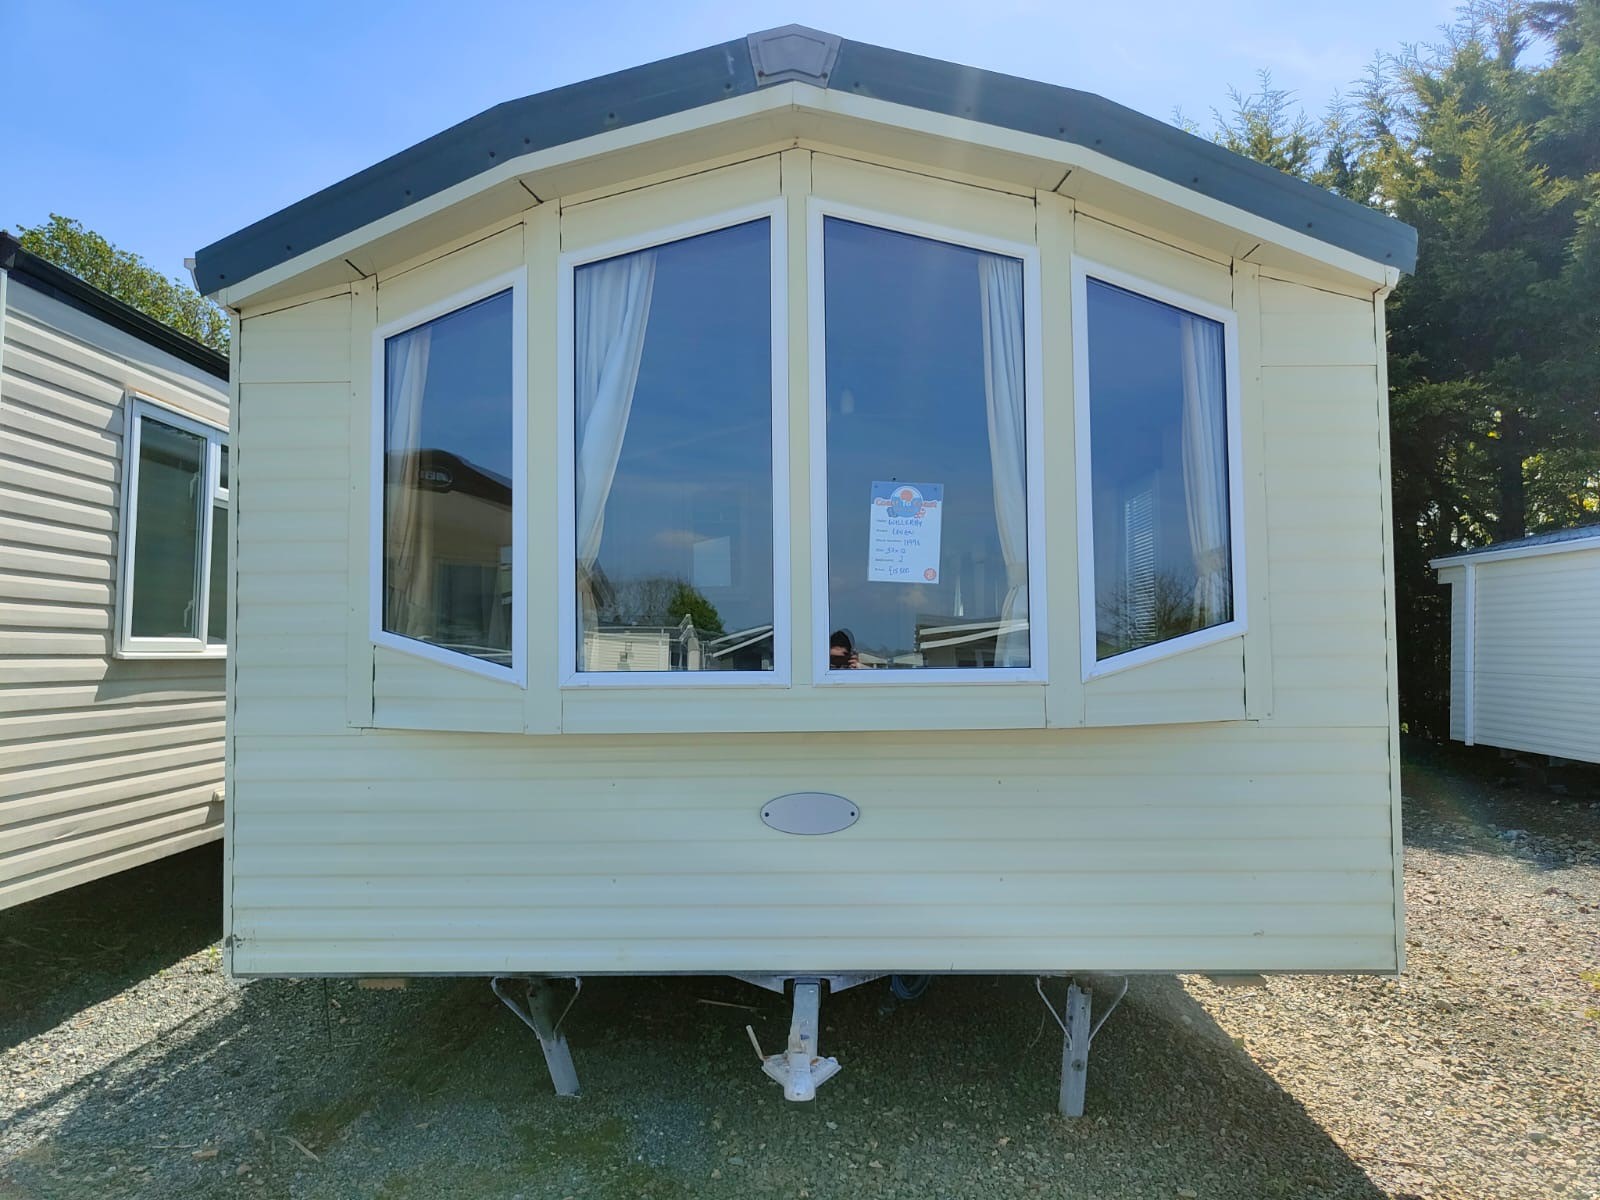 WILLERBY LEVEN 37 X 12 WITH 2 BEDROOMS DOUBLE GLAZING & CENTRAL HEATING GALVANISED CHASSIS For Sale Thumb